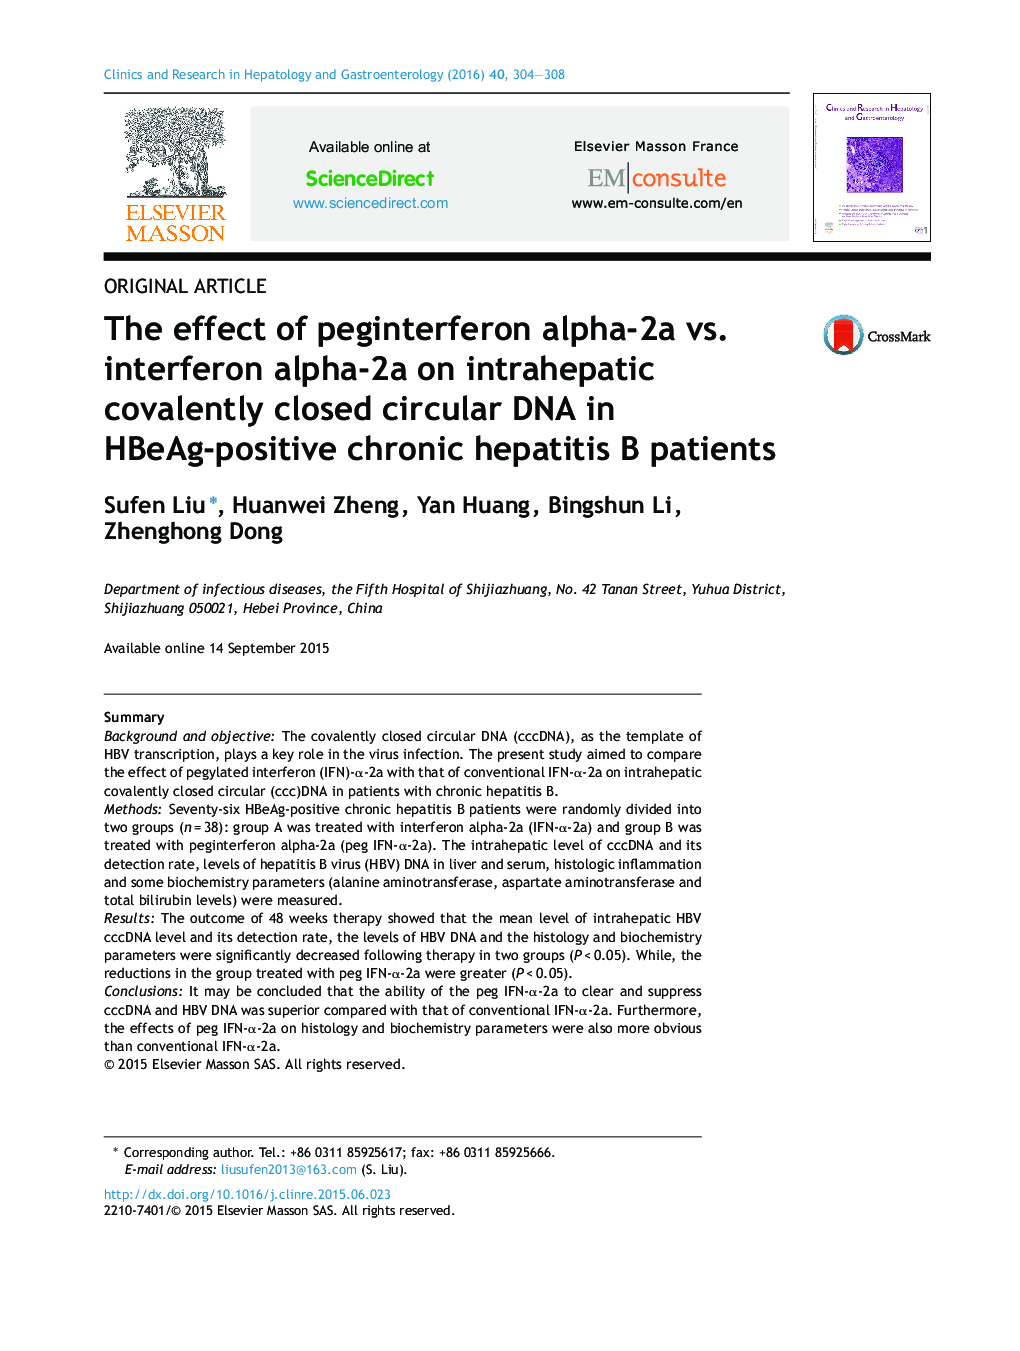 The effect of peginterferon alpha-2a vs. interferon alpha-2a on intrahepatic covalently closed circular DNA in HBeAg-positive chronic hepatitis B patients